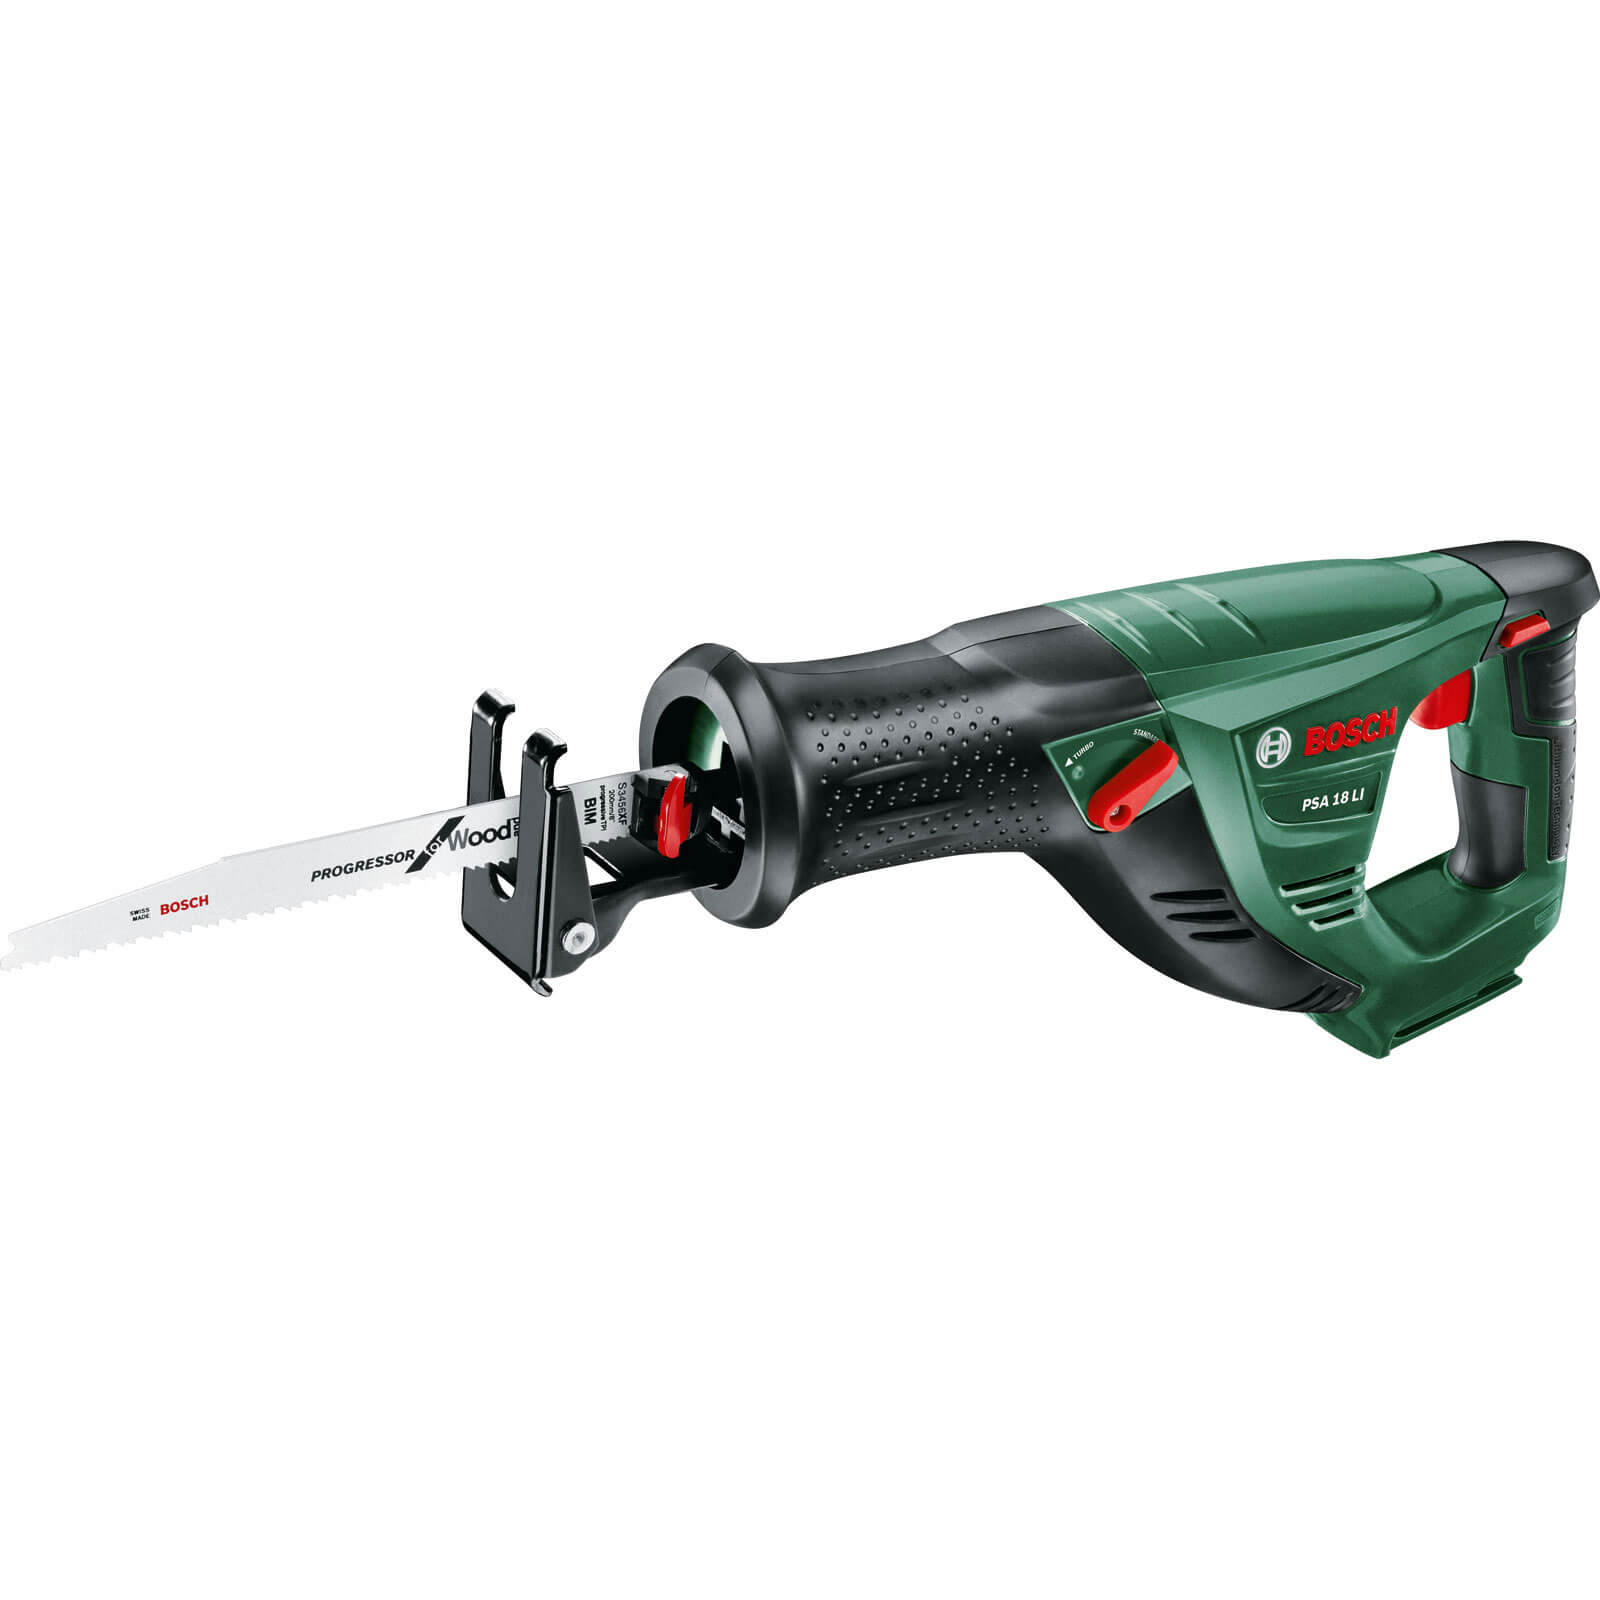 Bosch POWER4ALL PSA 18 LI 18v Cordless Sabre Saw without Battery or Charger